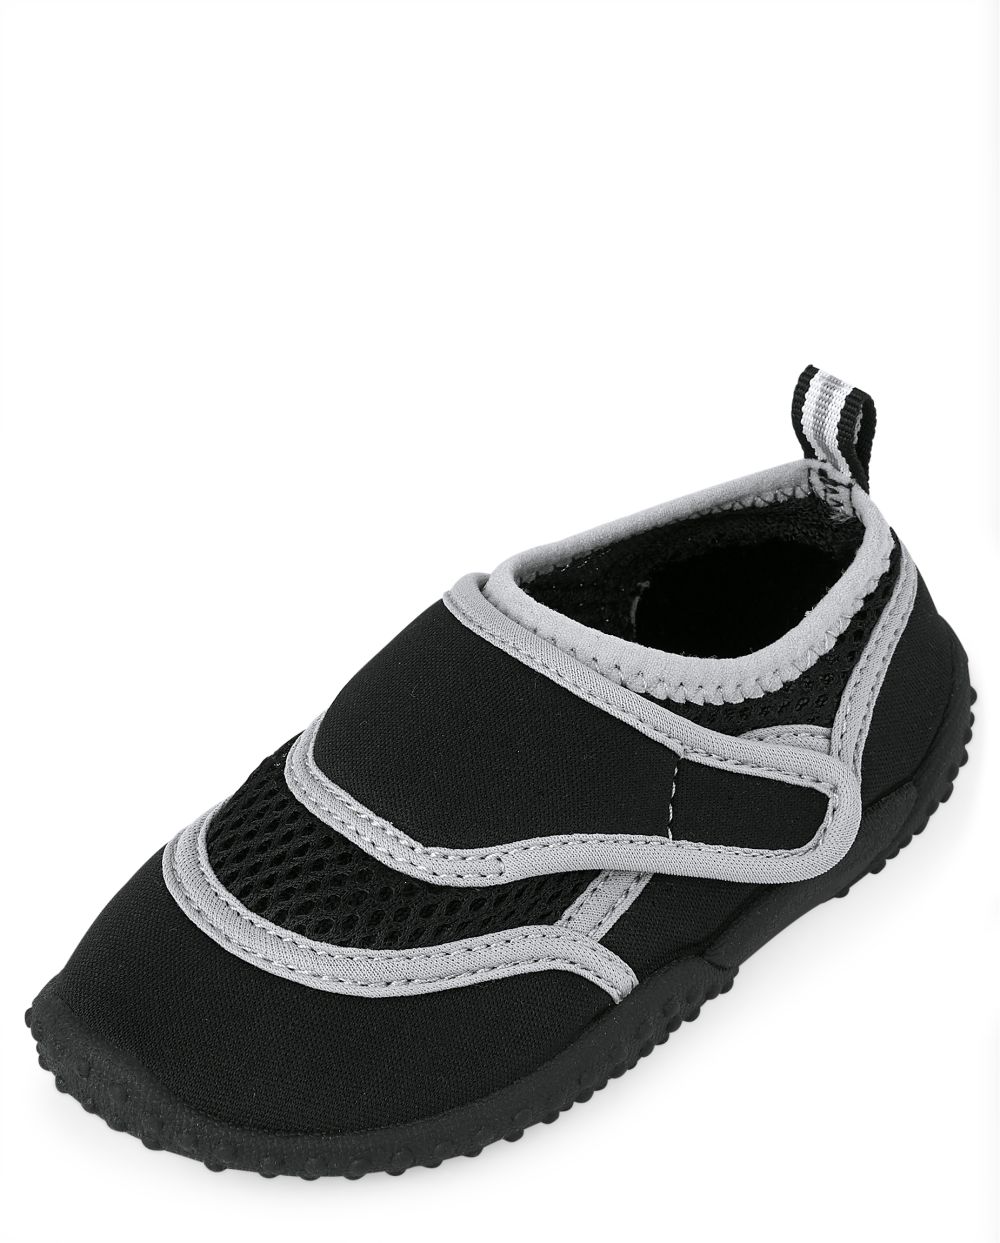 

s Toddler Boys Water Shoes - Black - The Children's Place